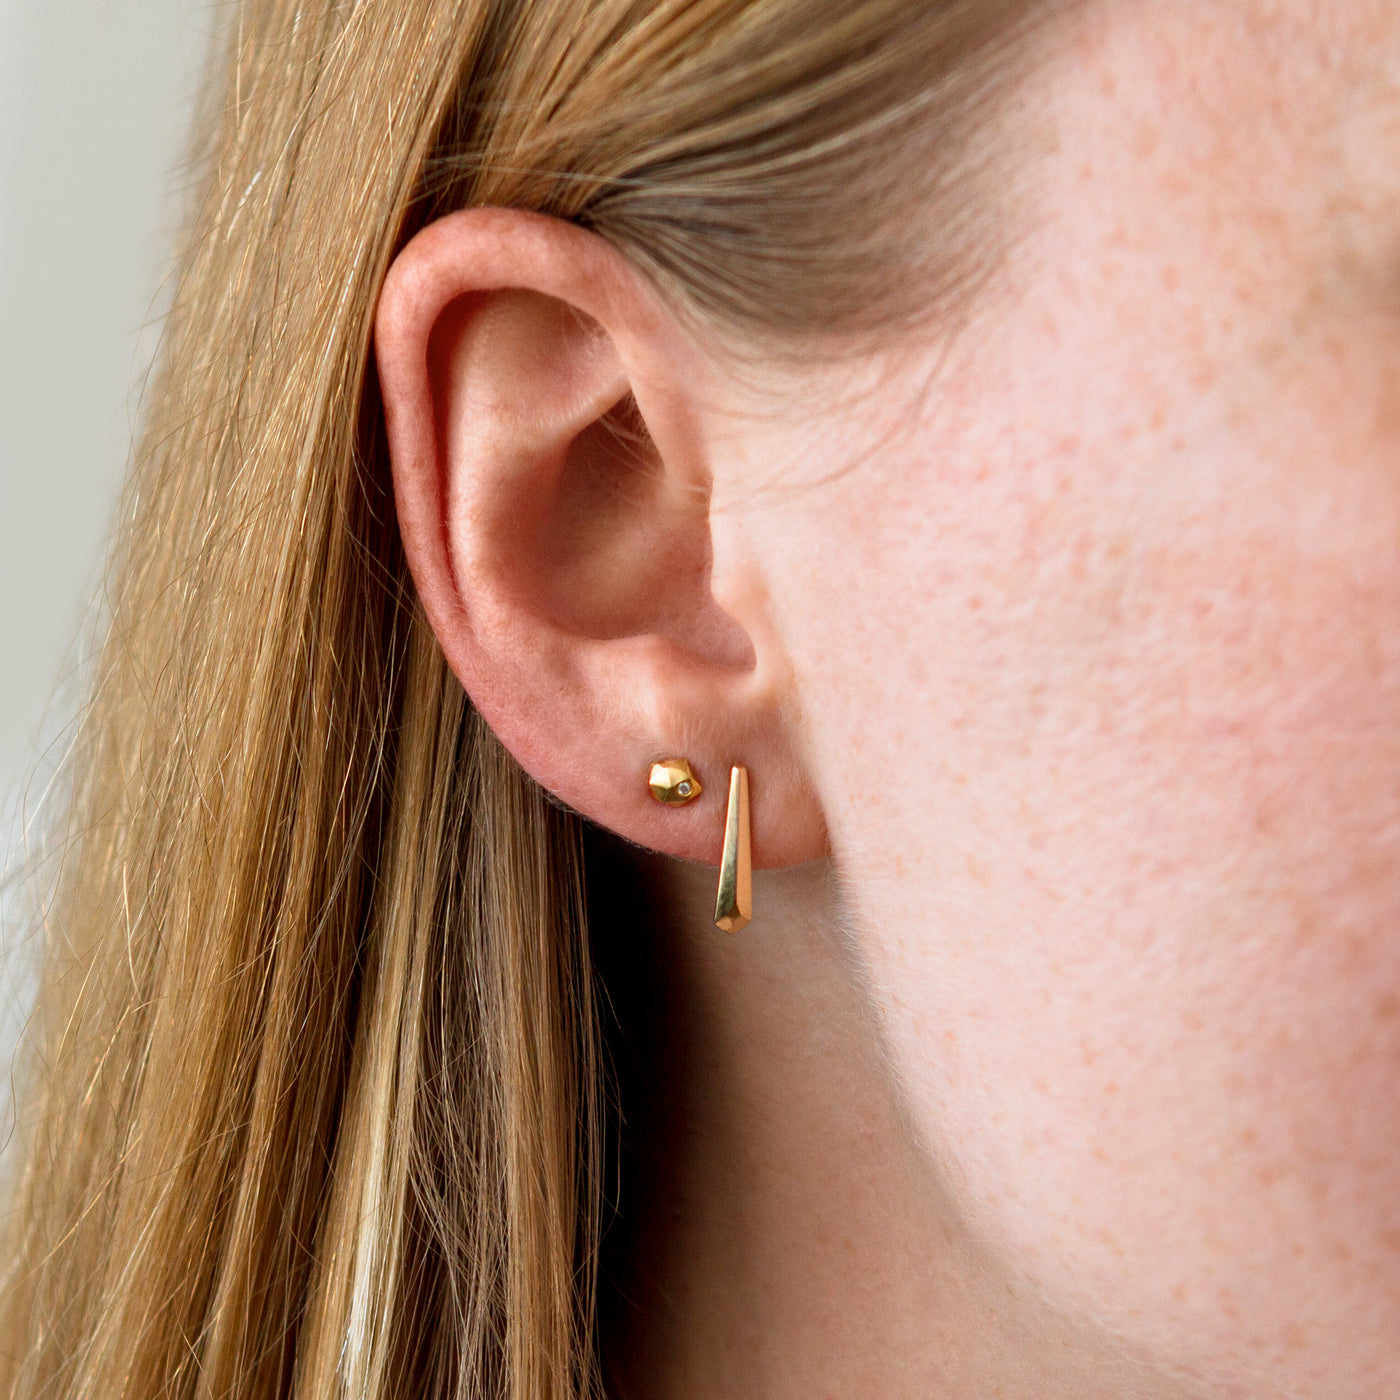 14k yellow gold micro fragment studs with diamonds on an ear